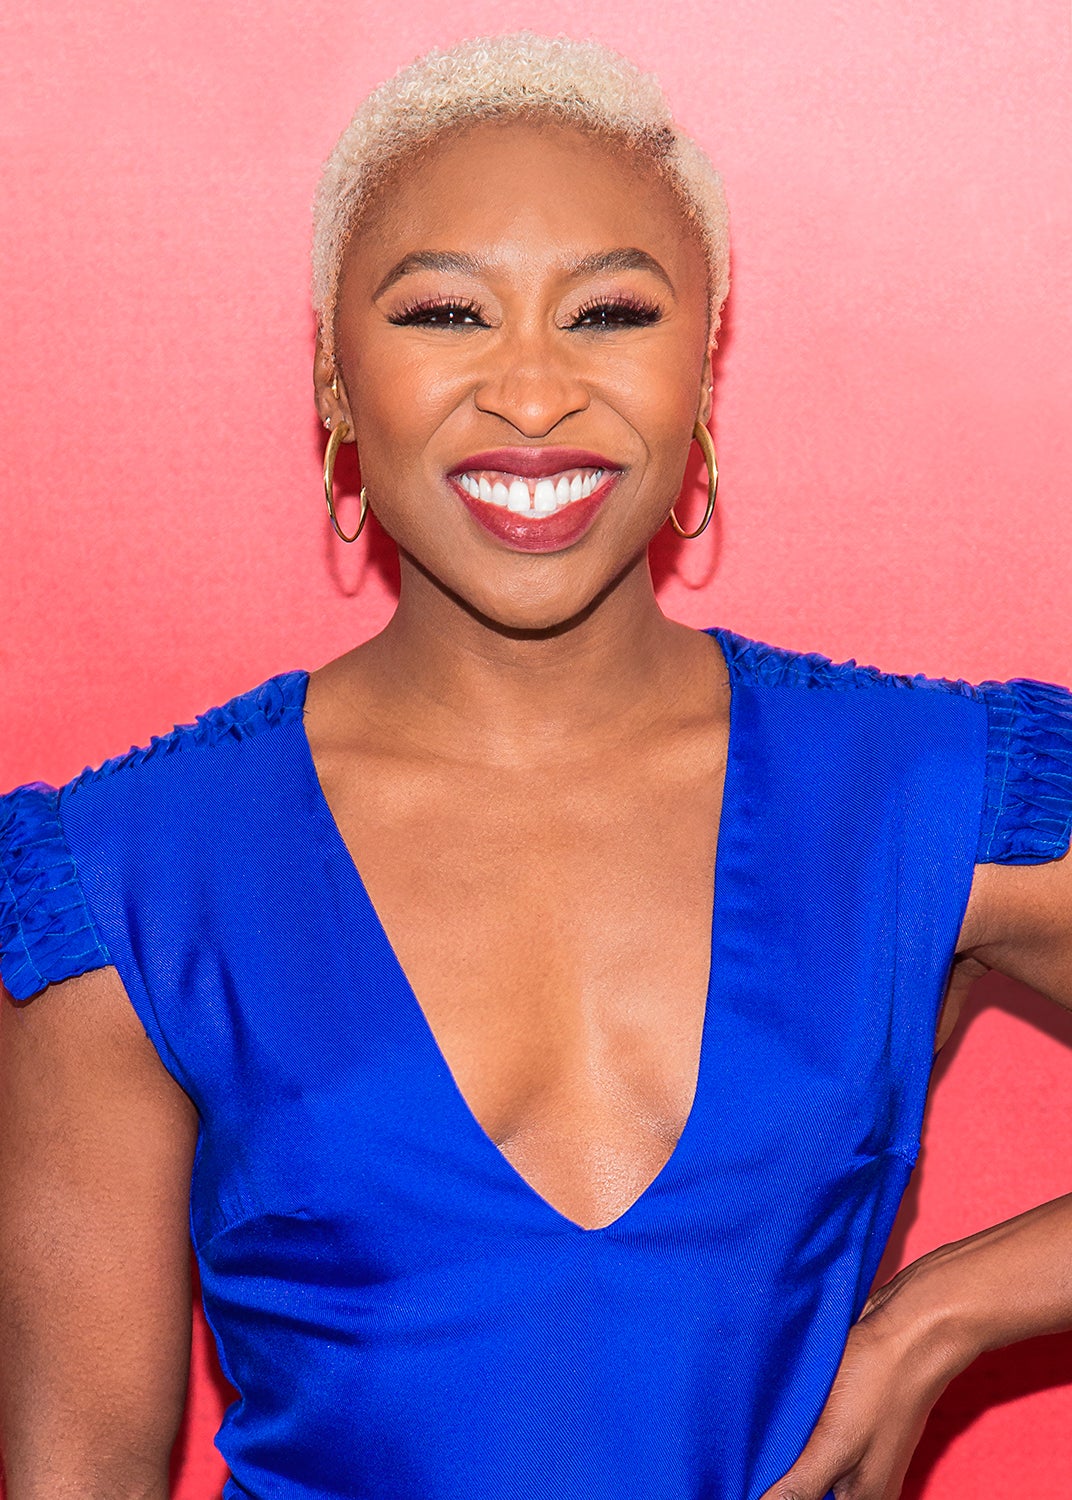 Cynthia Erivo Breaks Down The Detriment Of Black Women Criticizing One Another
